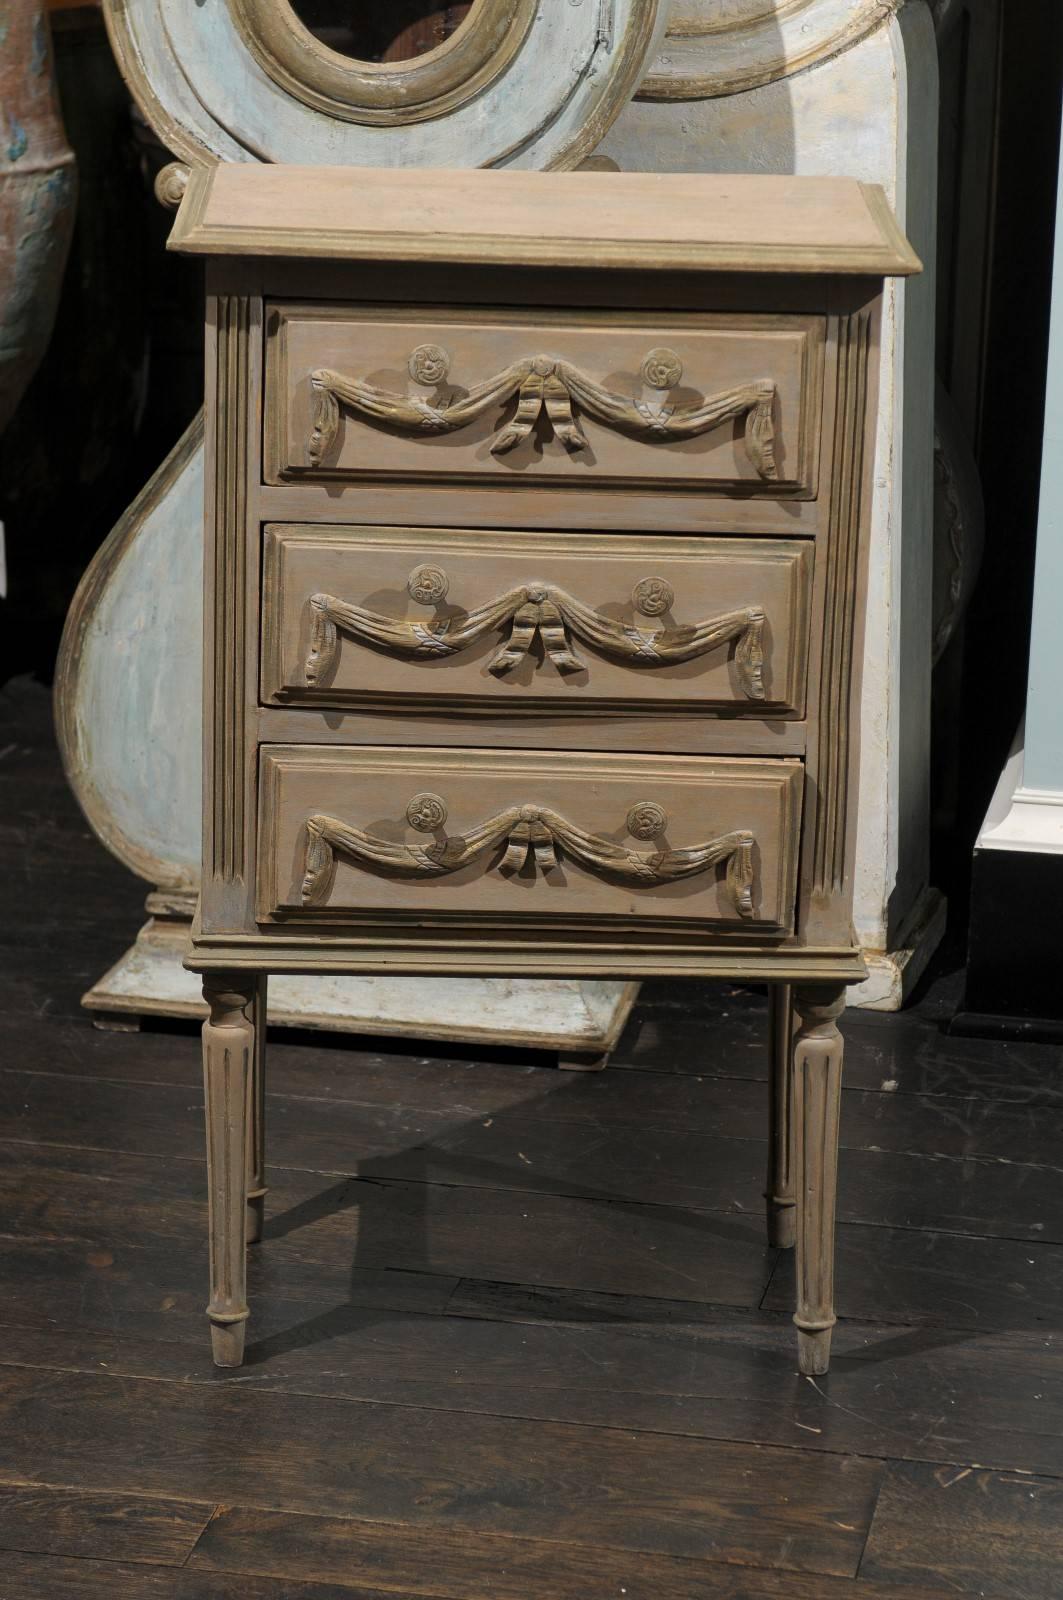 A French small size three-drawer painted wood commode. This little chest from the 1970s features nicely carved swag motifs on each drawer. This piece sits upon slender fluted legs. This three-drawer chest would work really well against a small wall